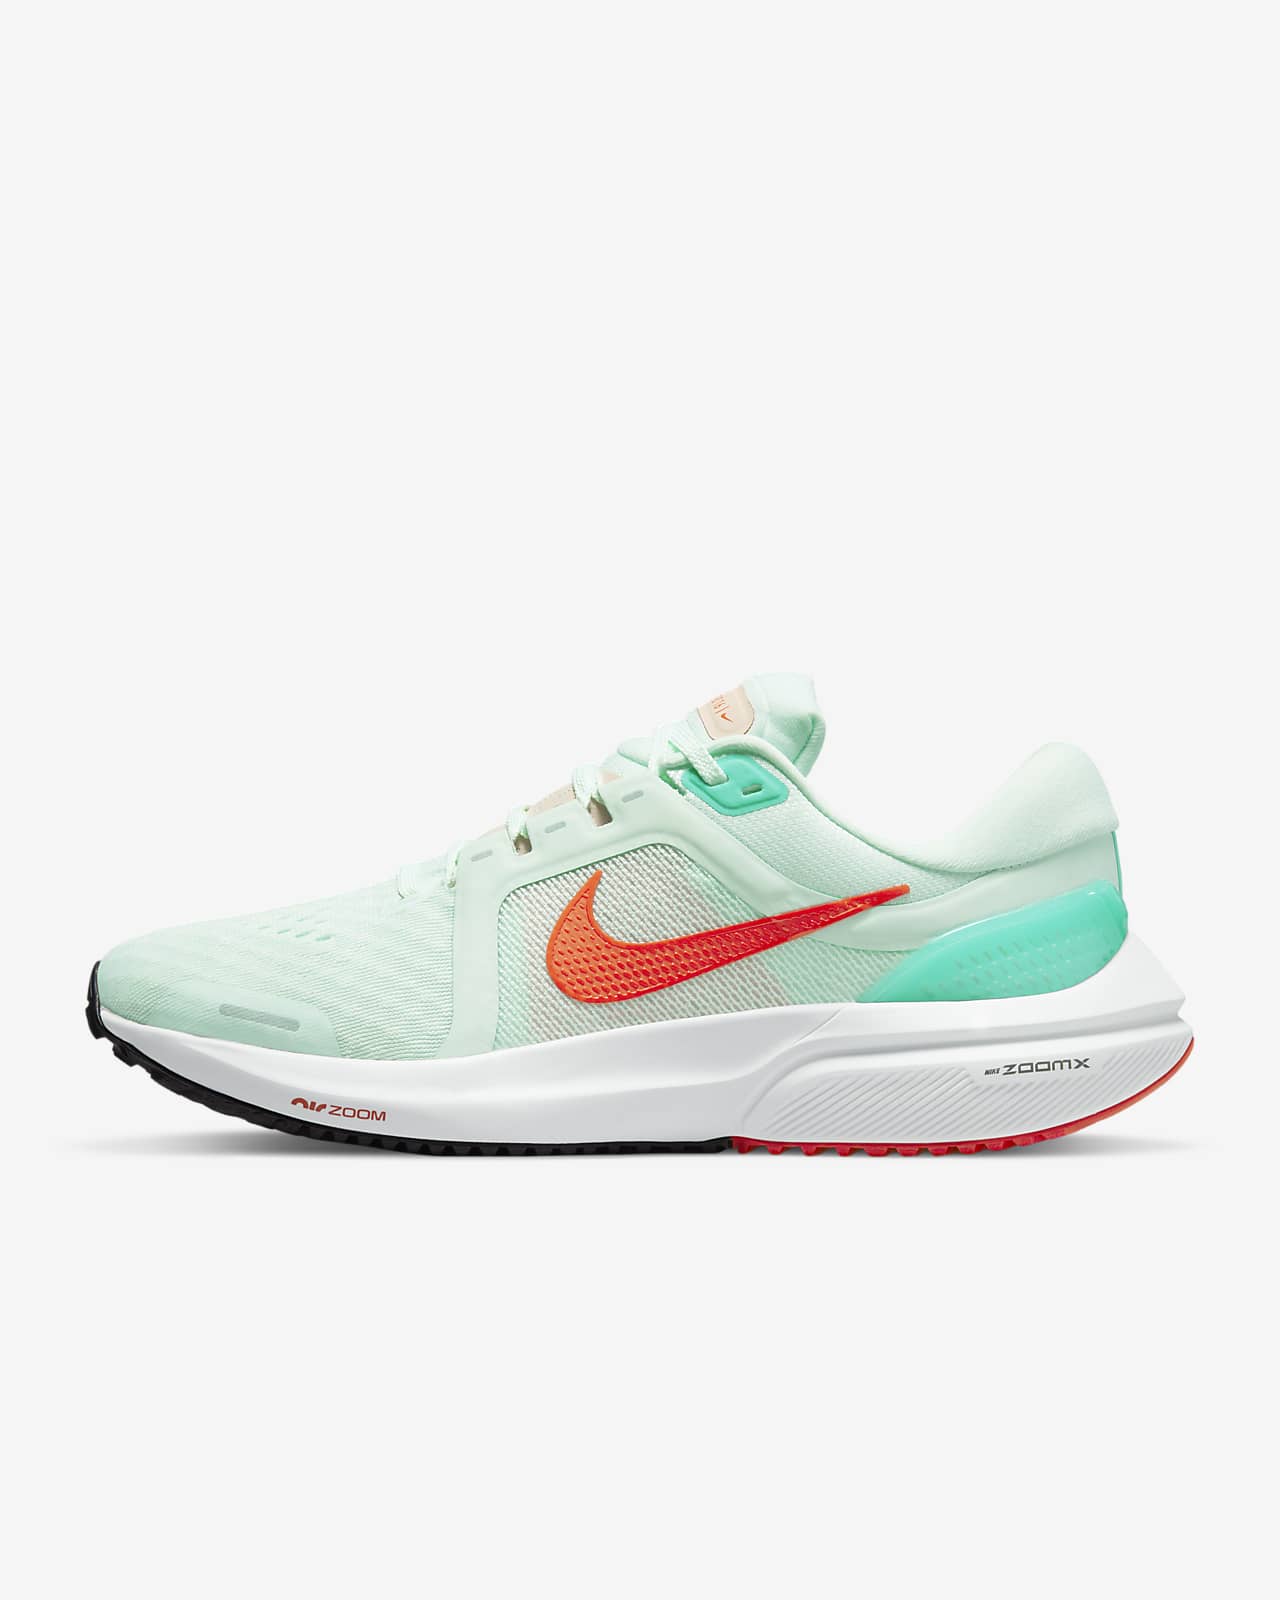 Nike Air Zoom Vomero 16 Women's Running Shoes. Nike.com ون دايركشن